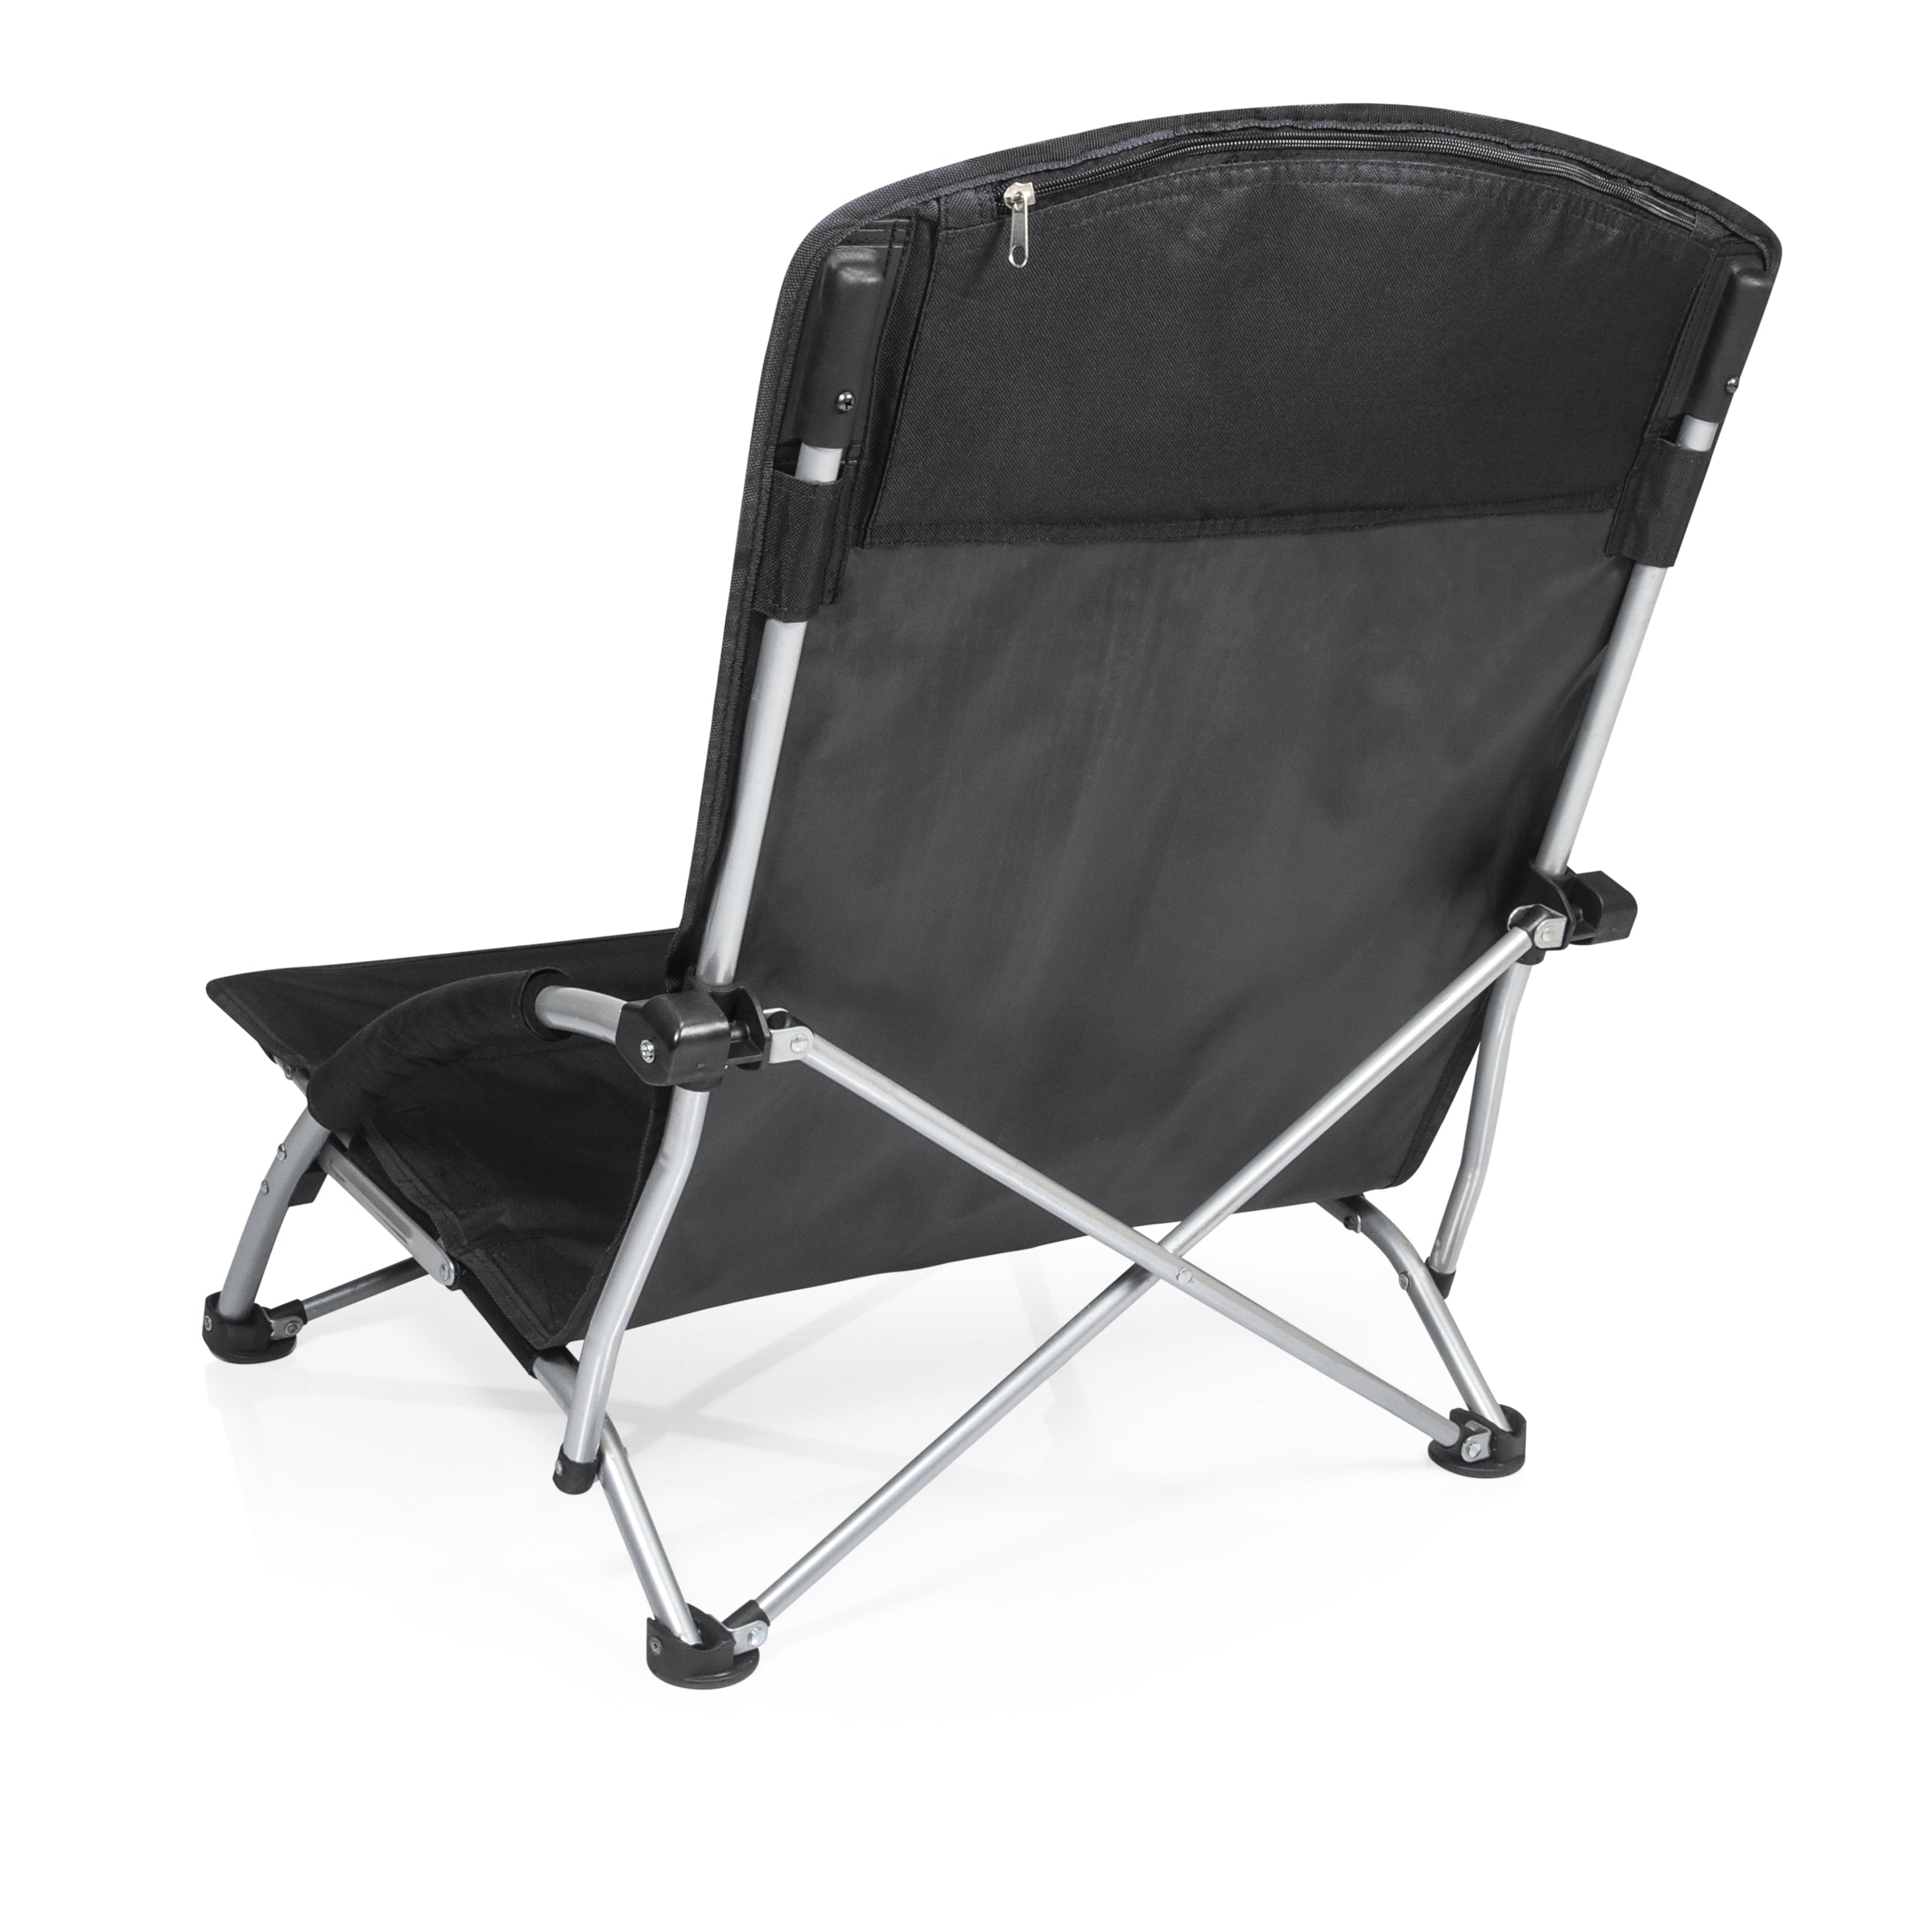 Baltimore Ravens - Tranquility Beach Chair with Carry Bag